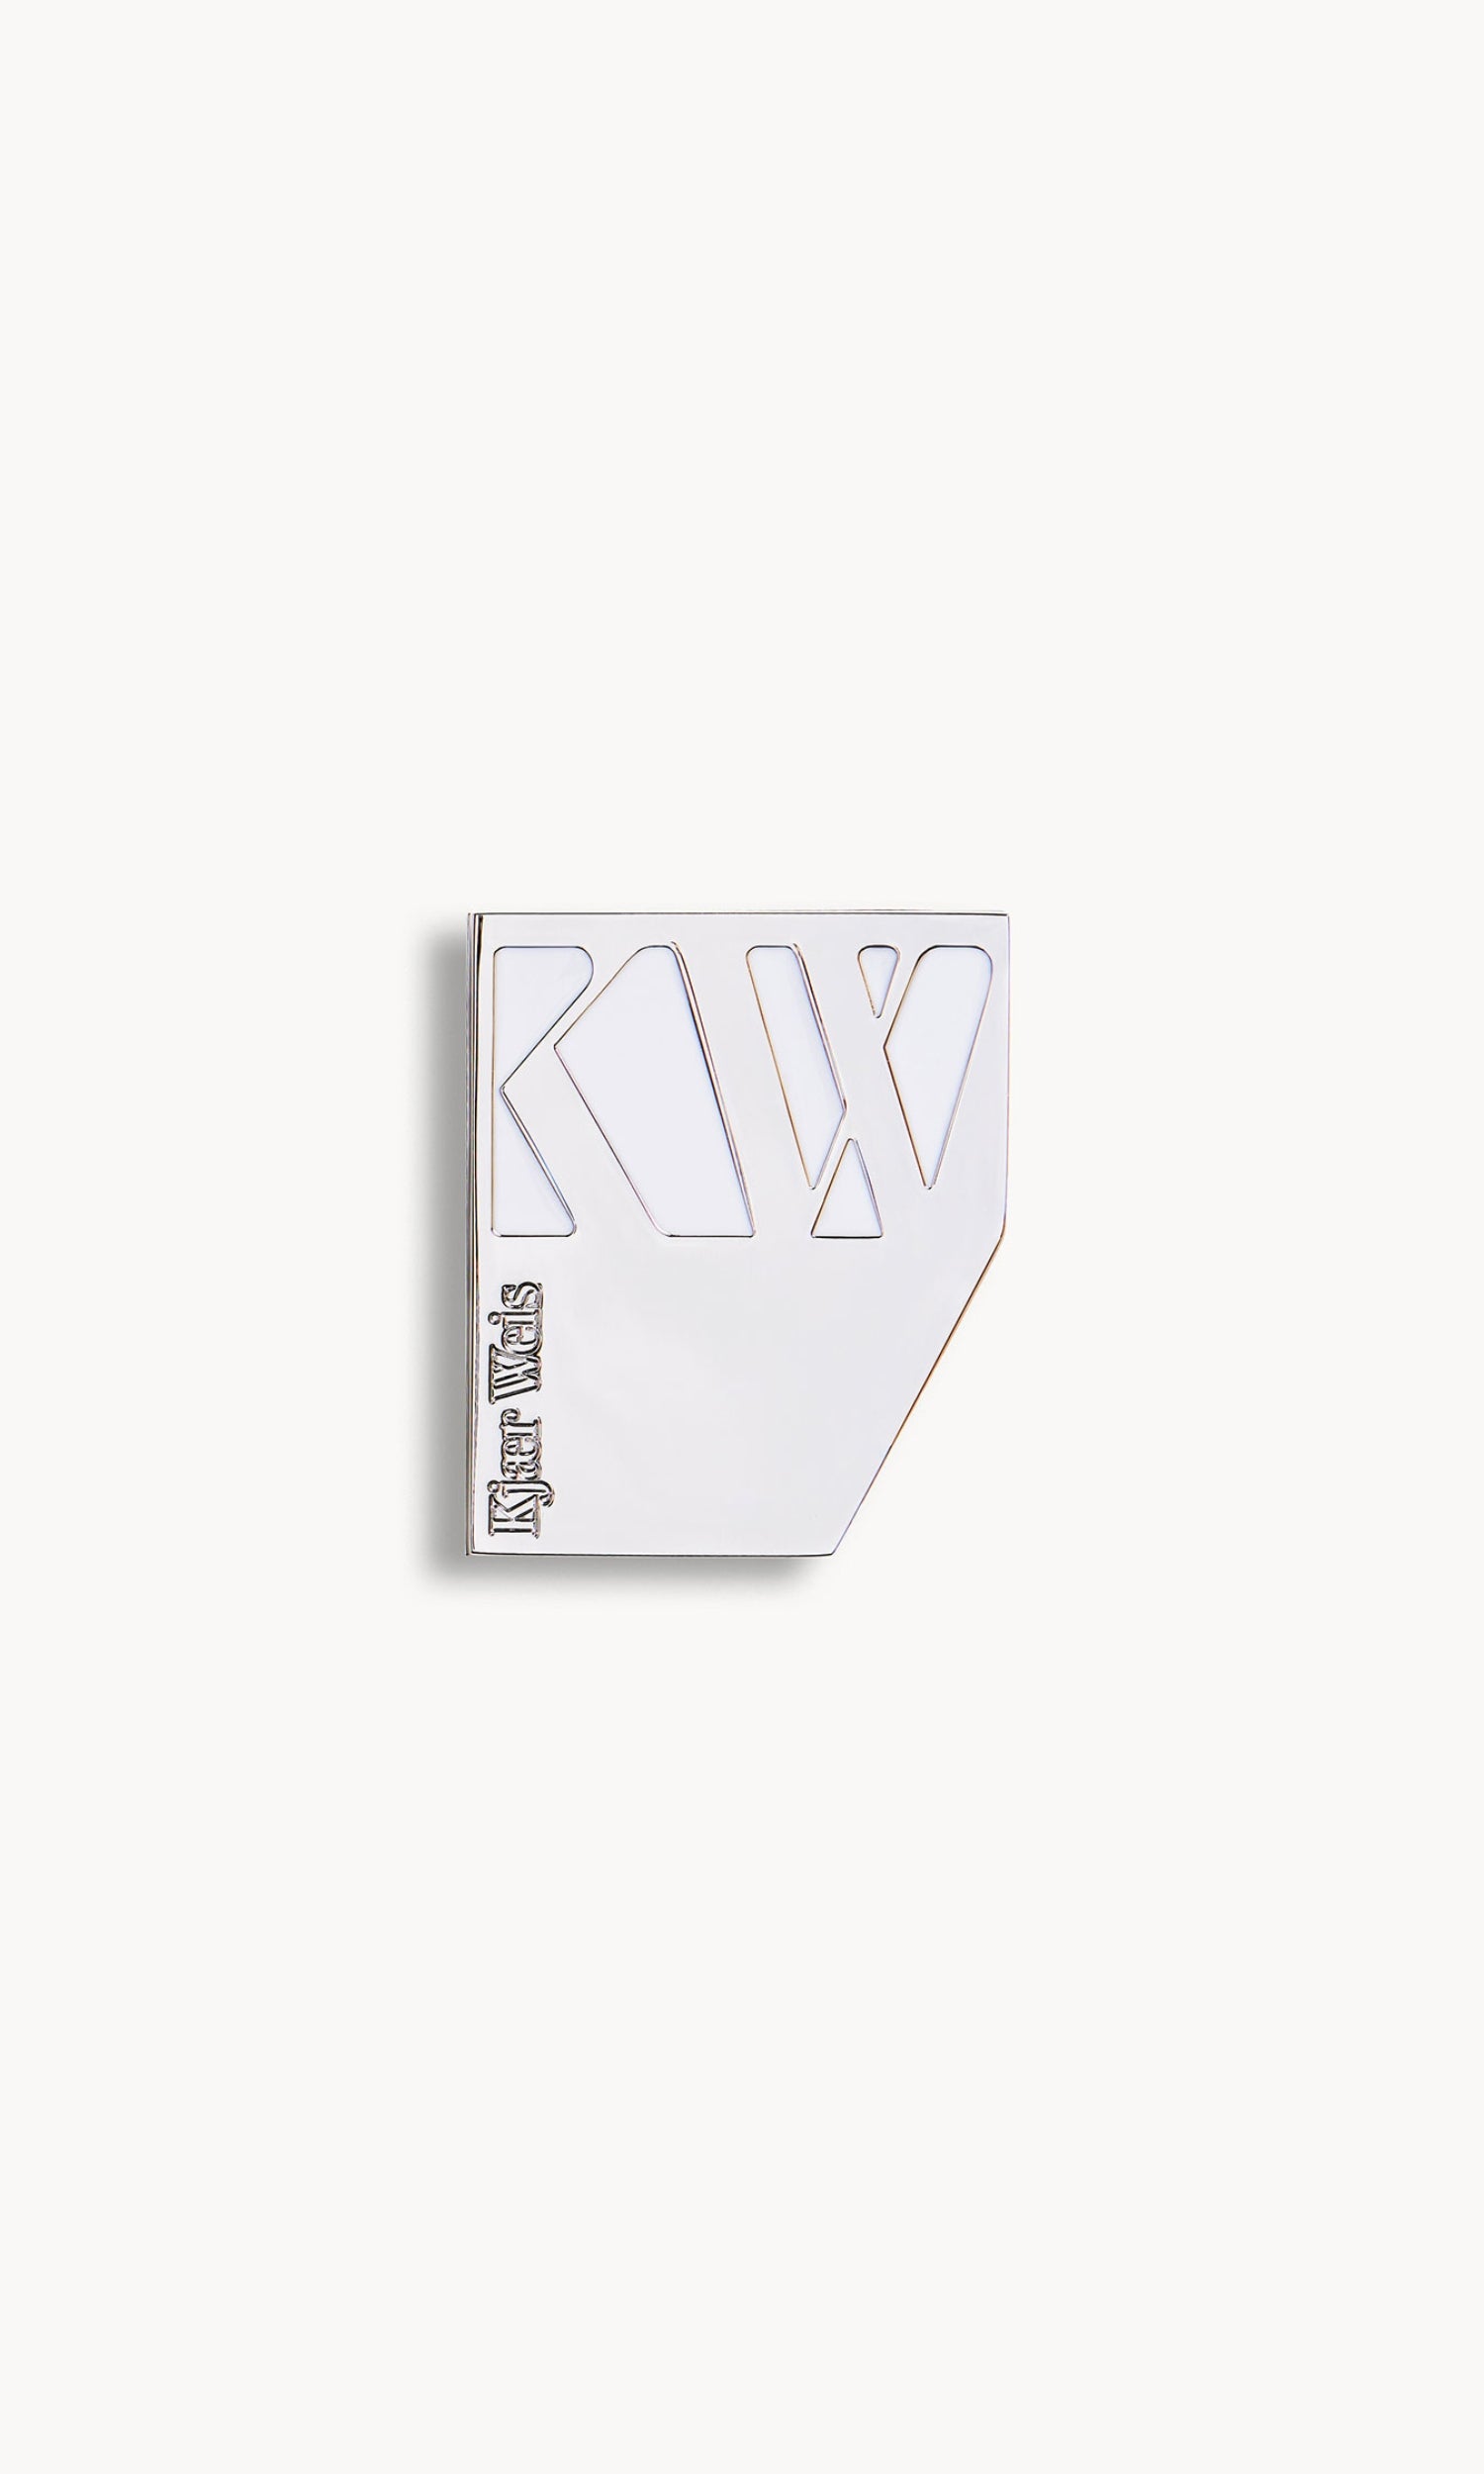 Solid metal palette with KW and Kjaer Weis embossed